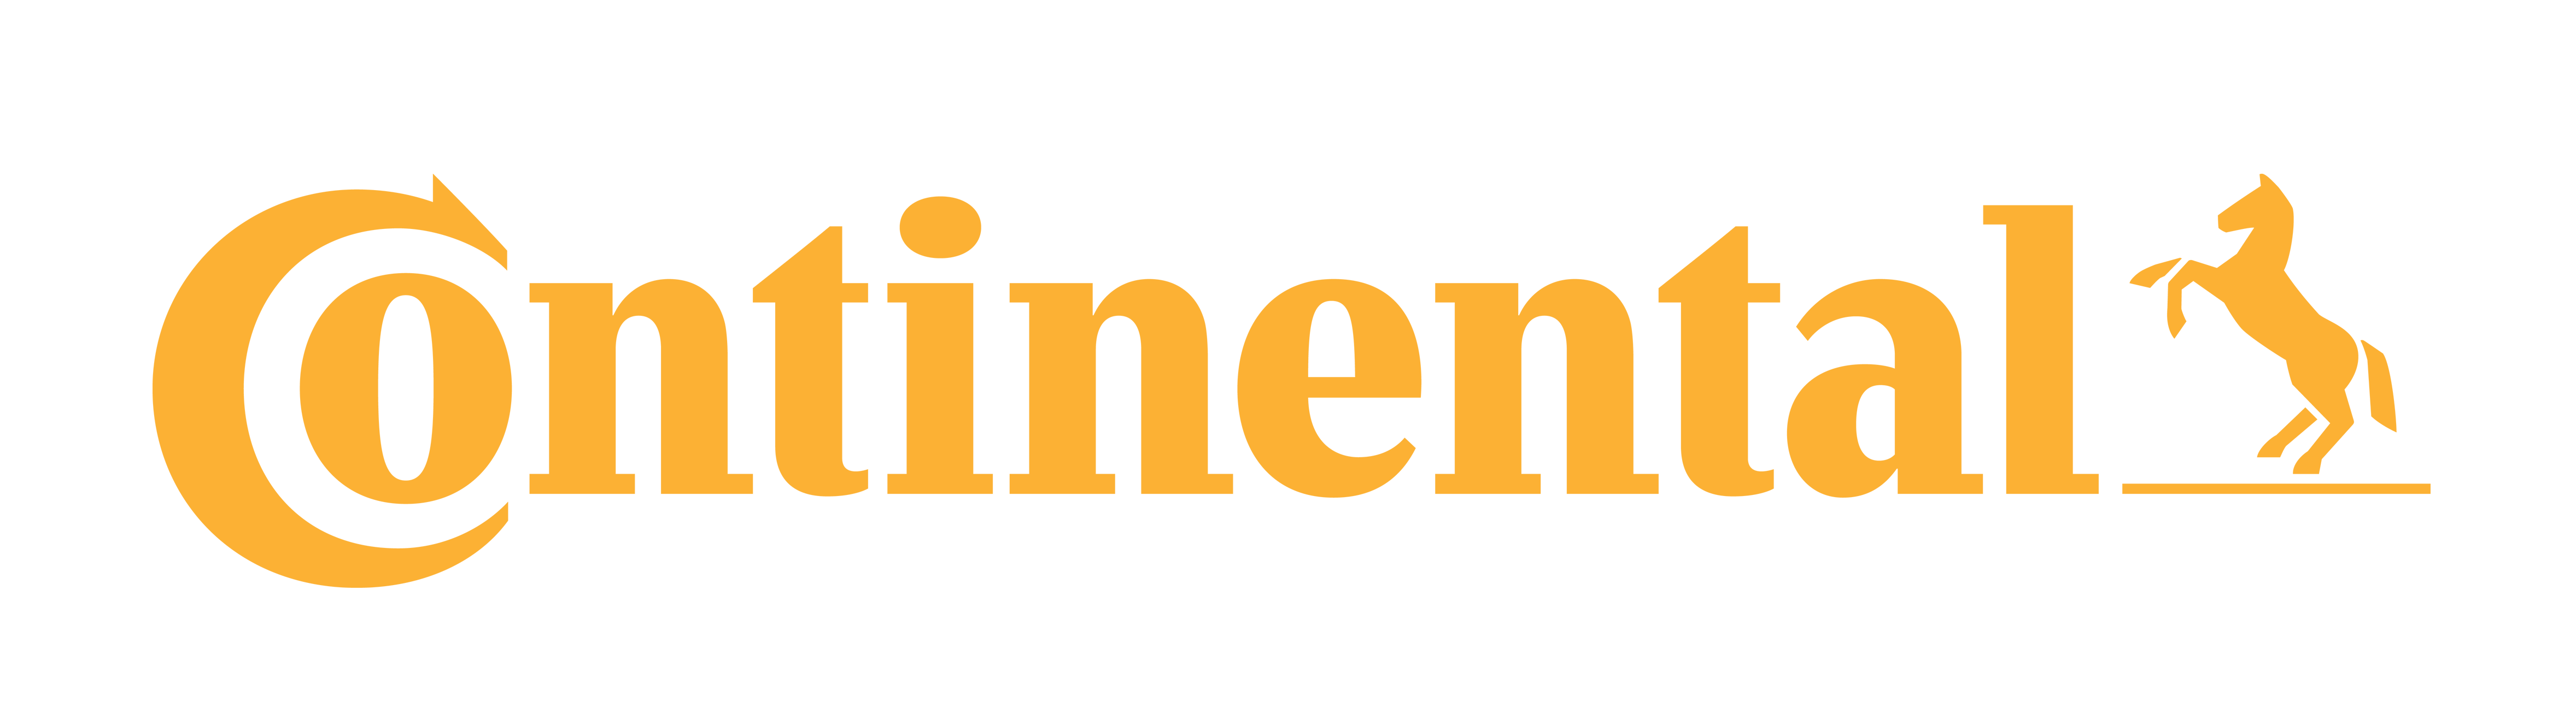 Continental Logo, Png, Meanin